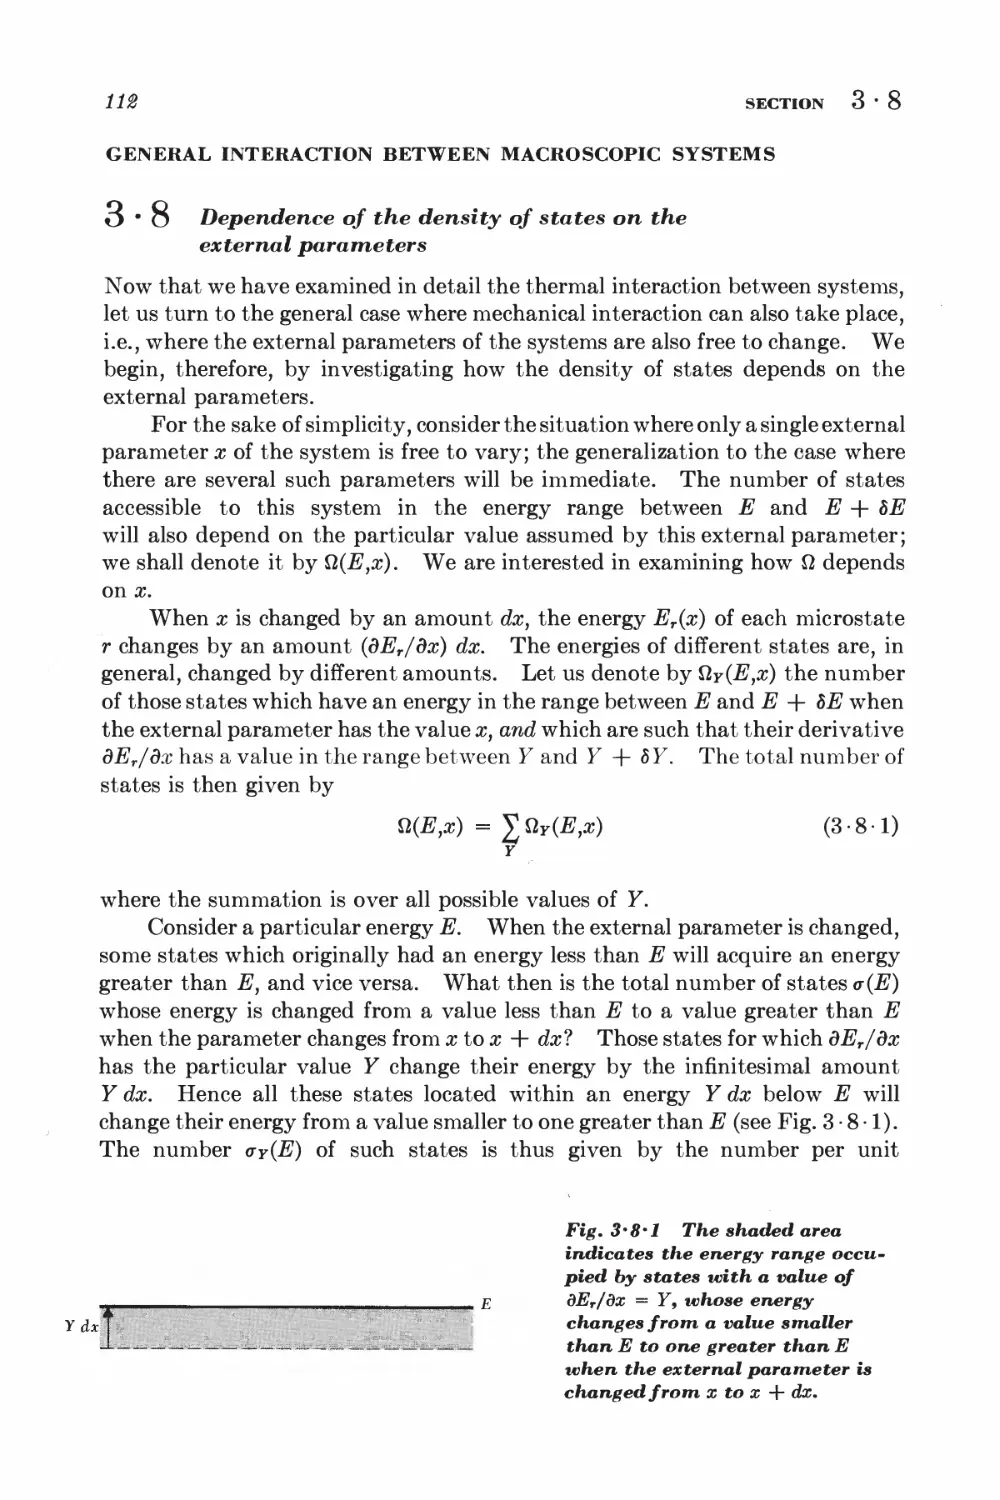 General Interaction between Macroscopic Systems